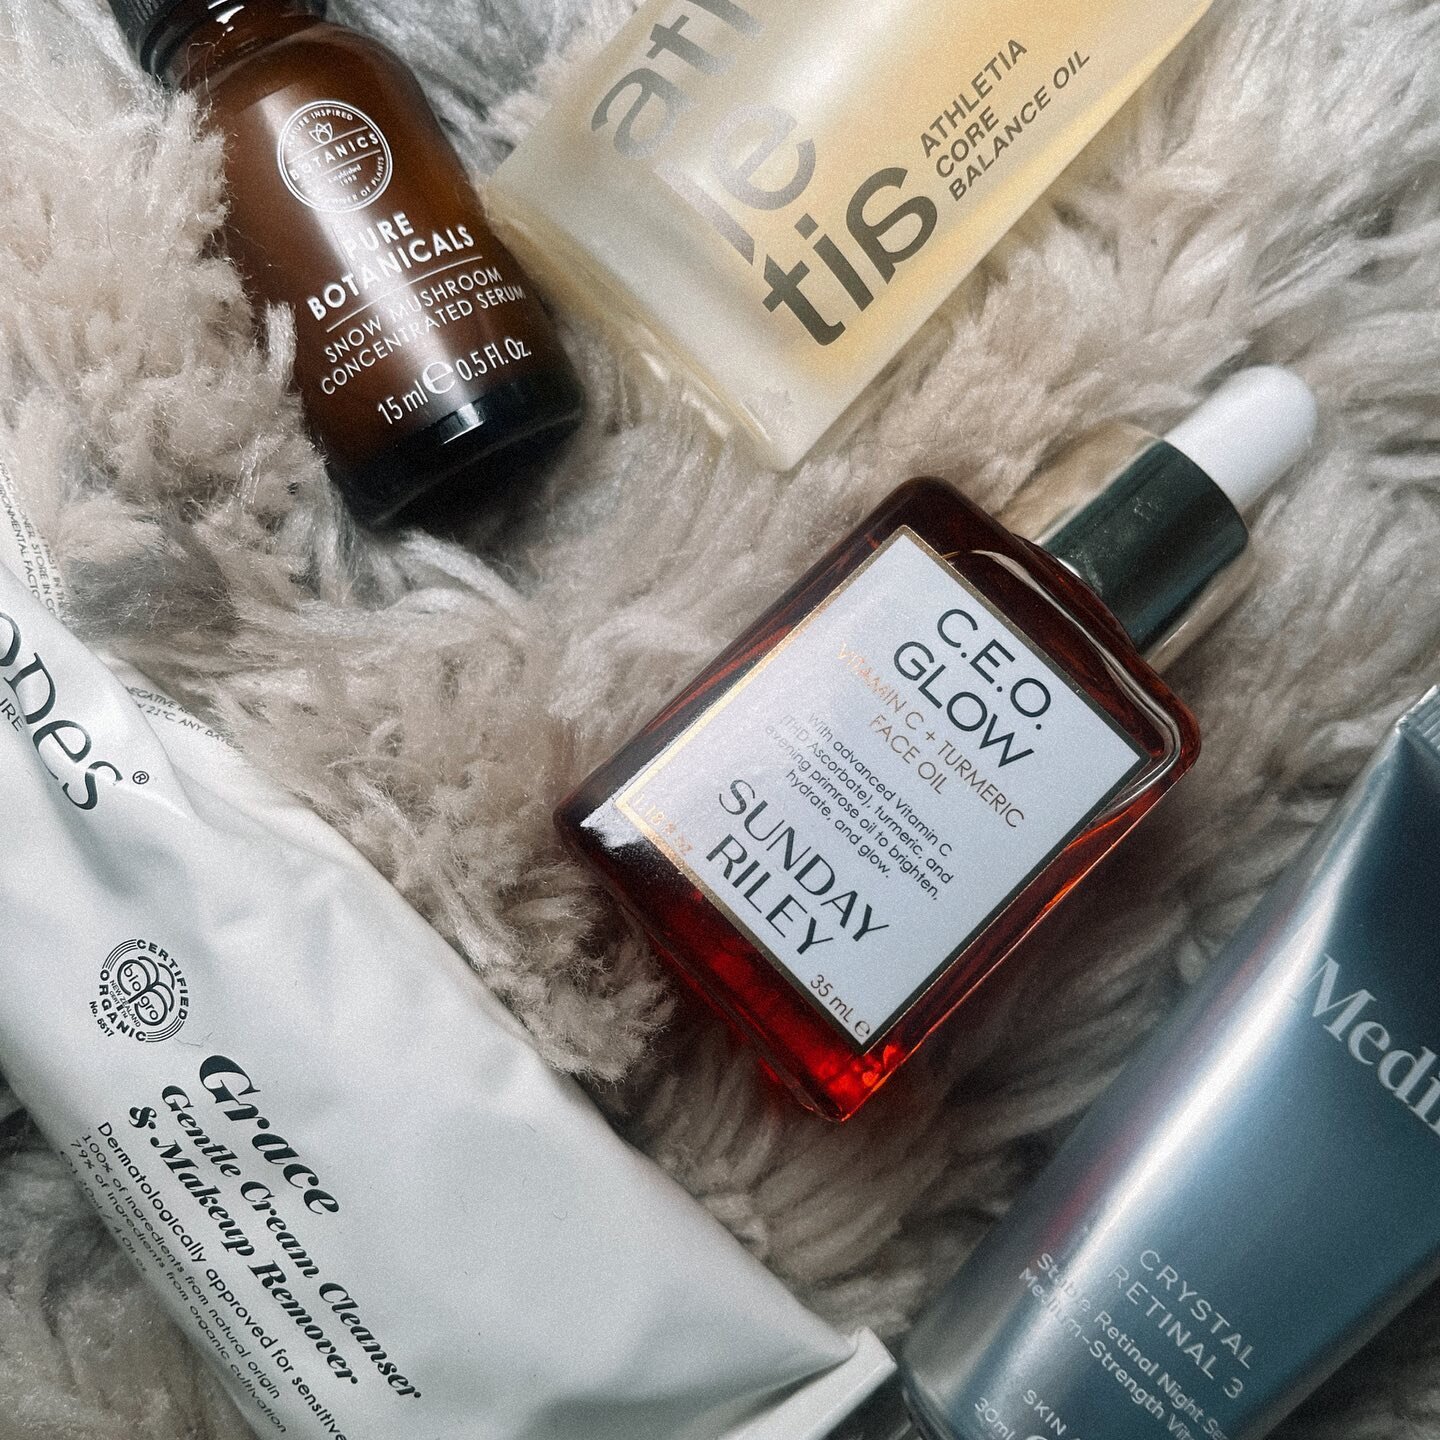 Climbing out of winter with a little help from my friends  #veganandcrueltyfree 

What skincare has helped you this winter? 

A few weeks ago my skin was really feeling that post winter dry and dullness&hellip;.so I did some shaking up to